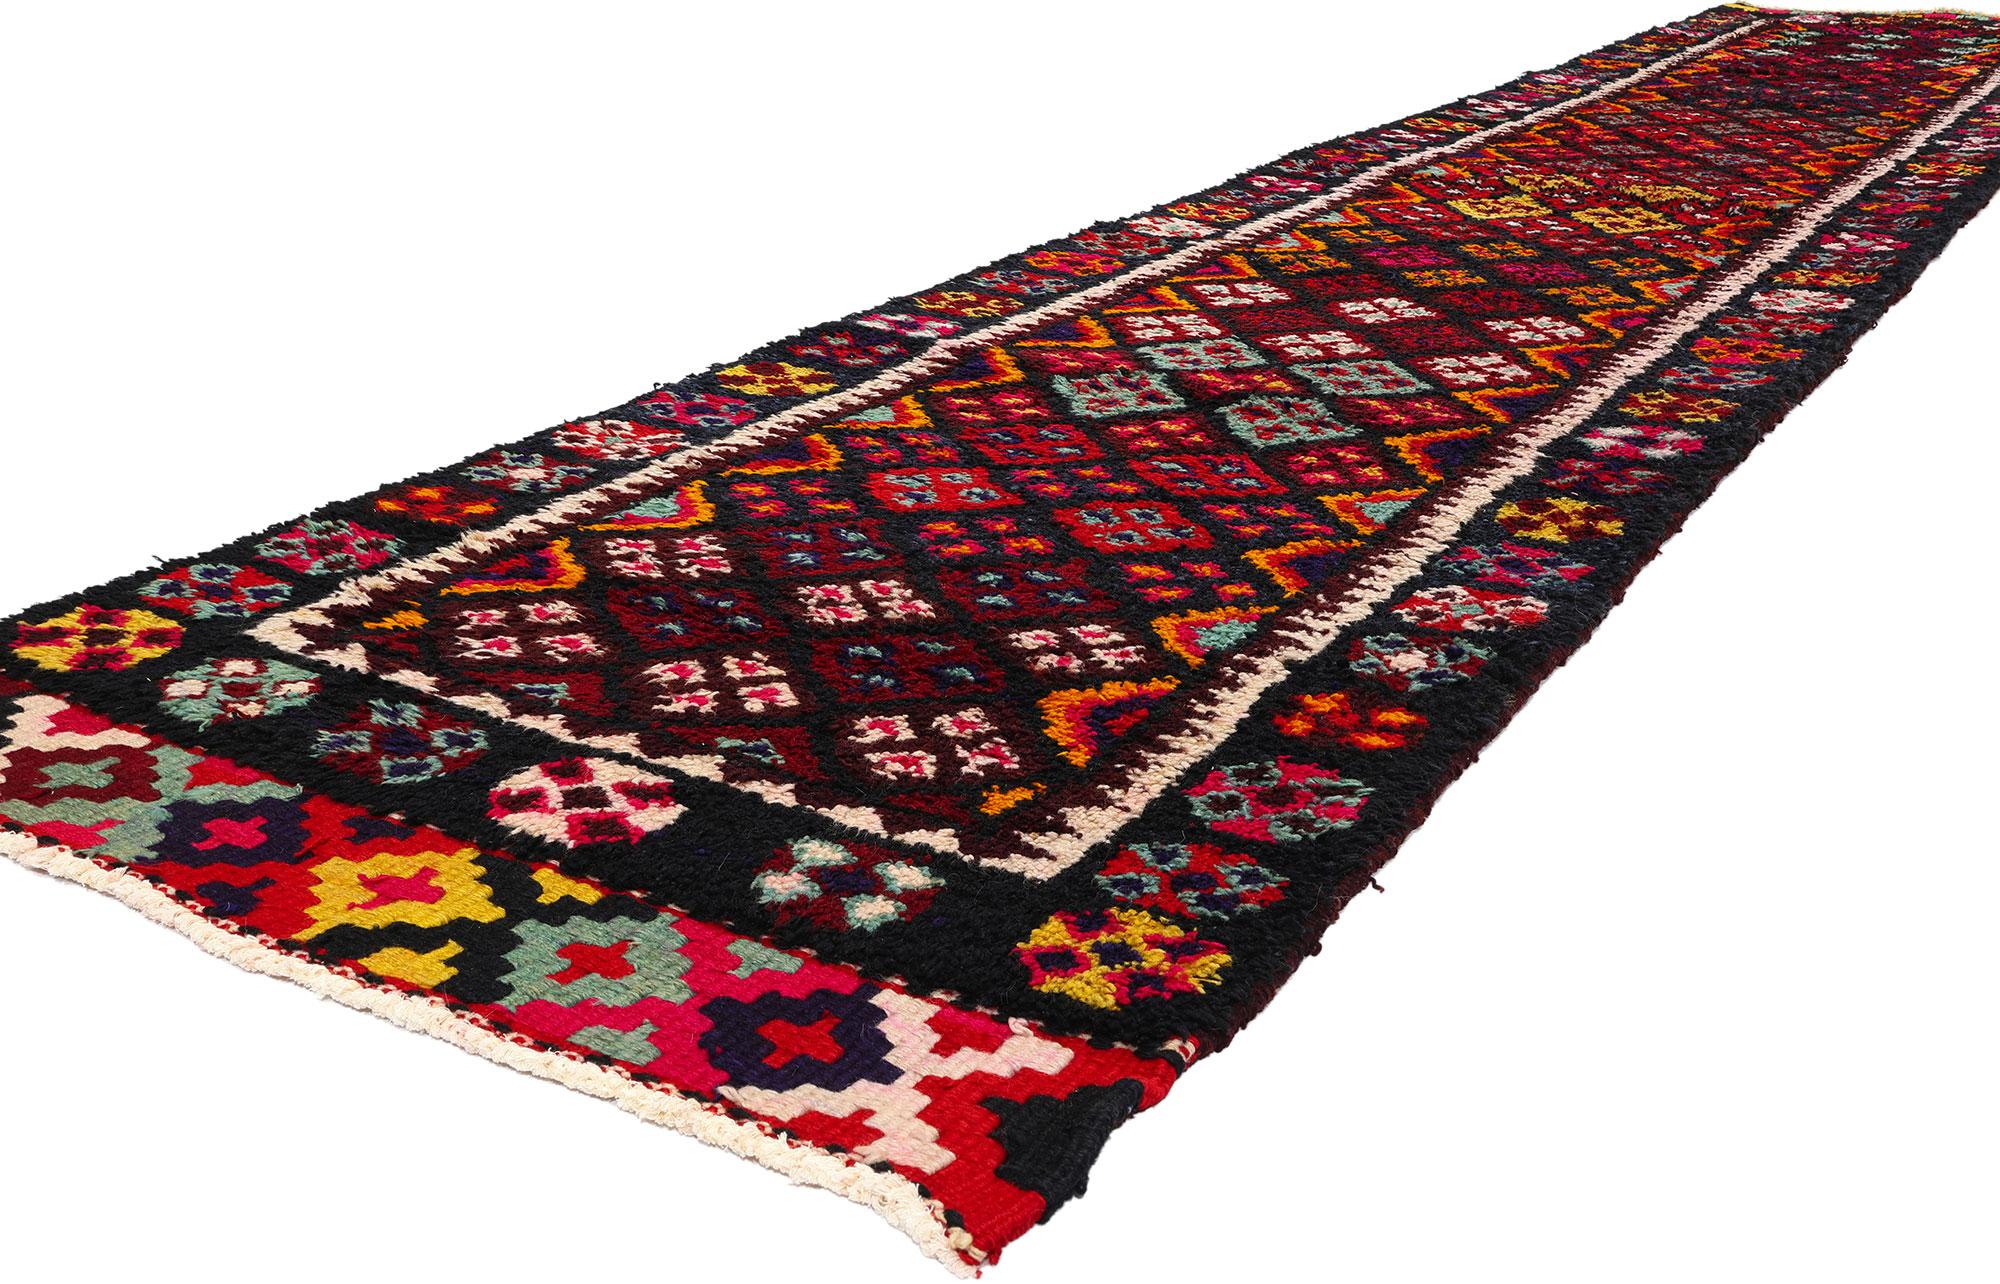 53890 Vintage Kurdish Tribal Rug Runner, 03'00 x 16'03. Handcrafted by Kurdish Herki tribes in eastern Turkey, notably in the Hakkari province, Kurdish rugs are renowned for their geometric patterns and vivid hues. Woven meticulously with premium